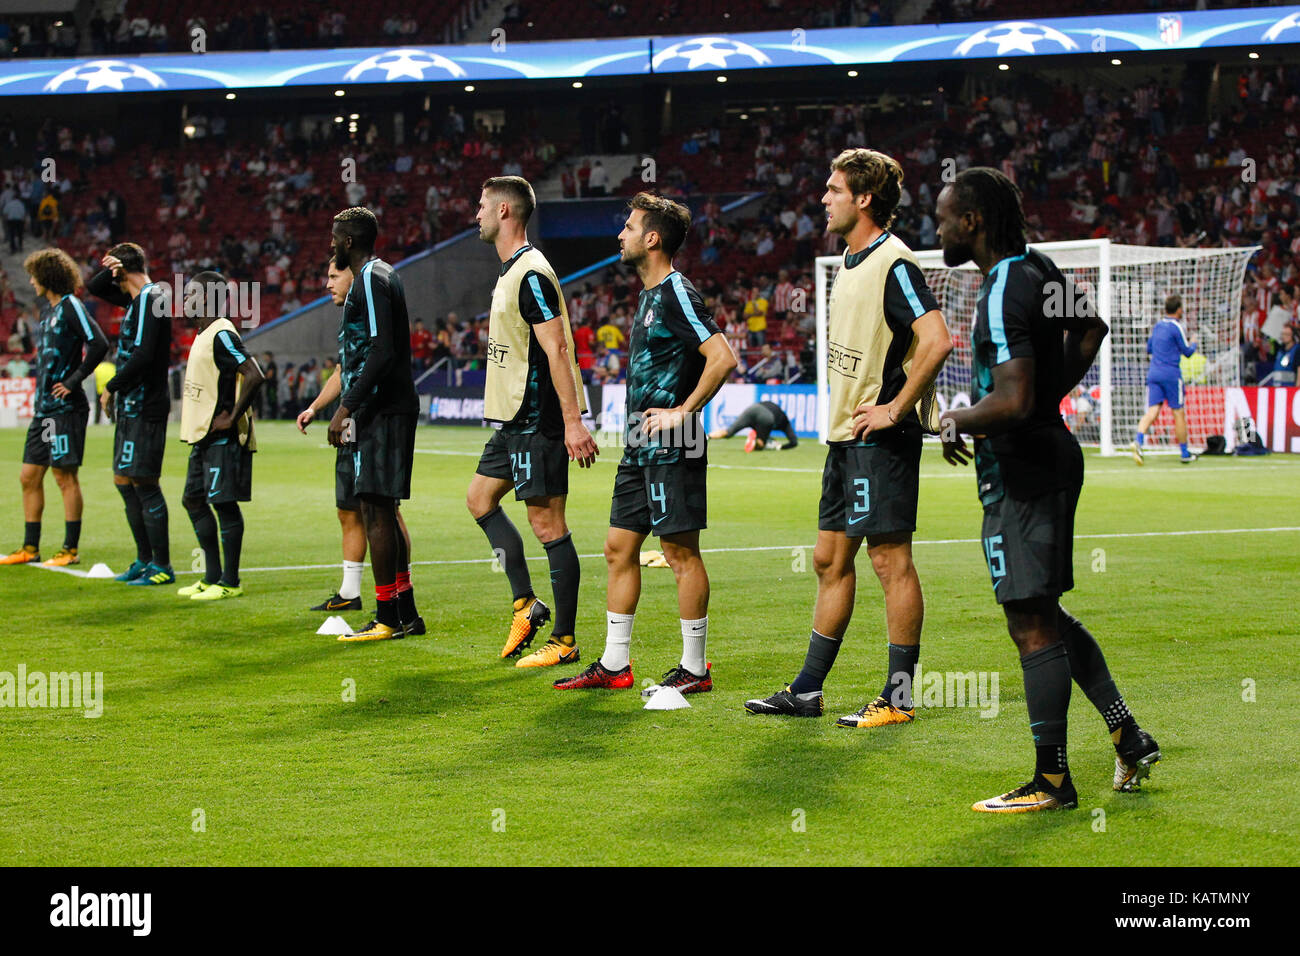 Madrid, Spain. 27th Sep, 2017. Cesc Fabregas (4) Chelsea FC's player Pre-match warm-up Marcos Alonso (3) Chelsea FC's player.Victor Moses (15) Chelsea FC's player.Gary Cahill (24) Chelsea FC's player. UCL Champions League between Atletico de Madrid vs Chelsea FC at the Wanda Metropolitano stadium in Madrid, Spain, September 27, 2017 . Credit: Gtres Información más Comuniación on line, S.L./Alamy Live News Stock Photo